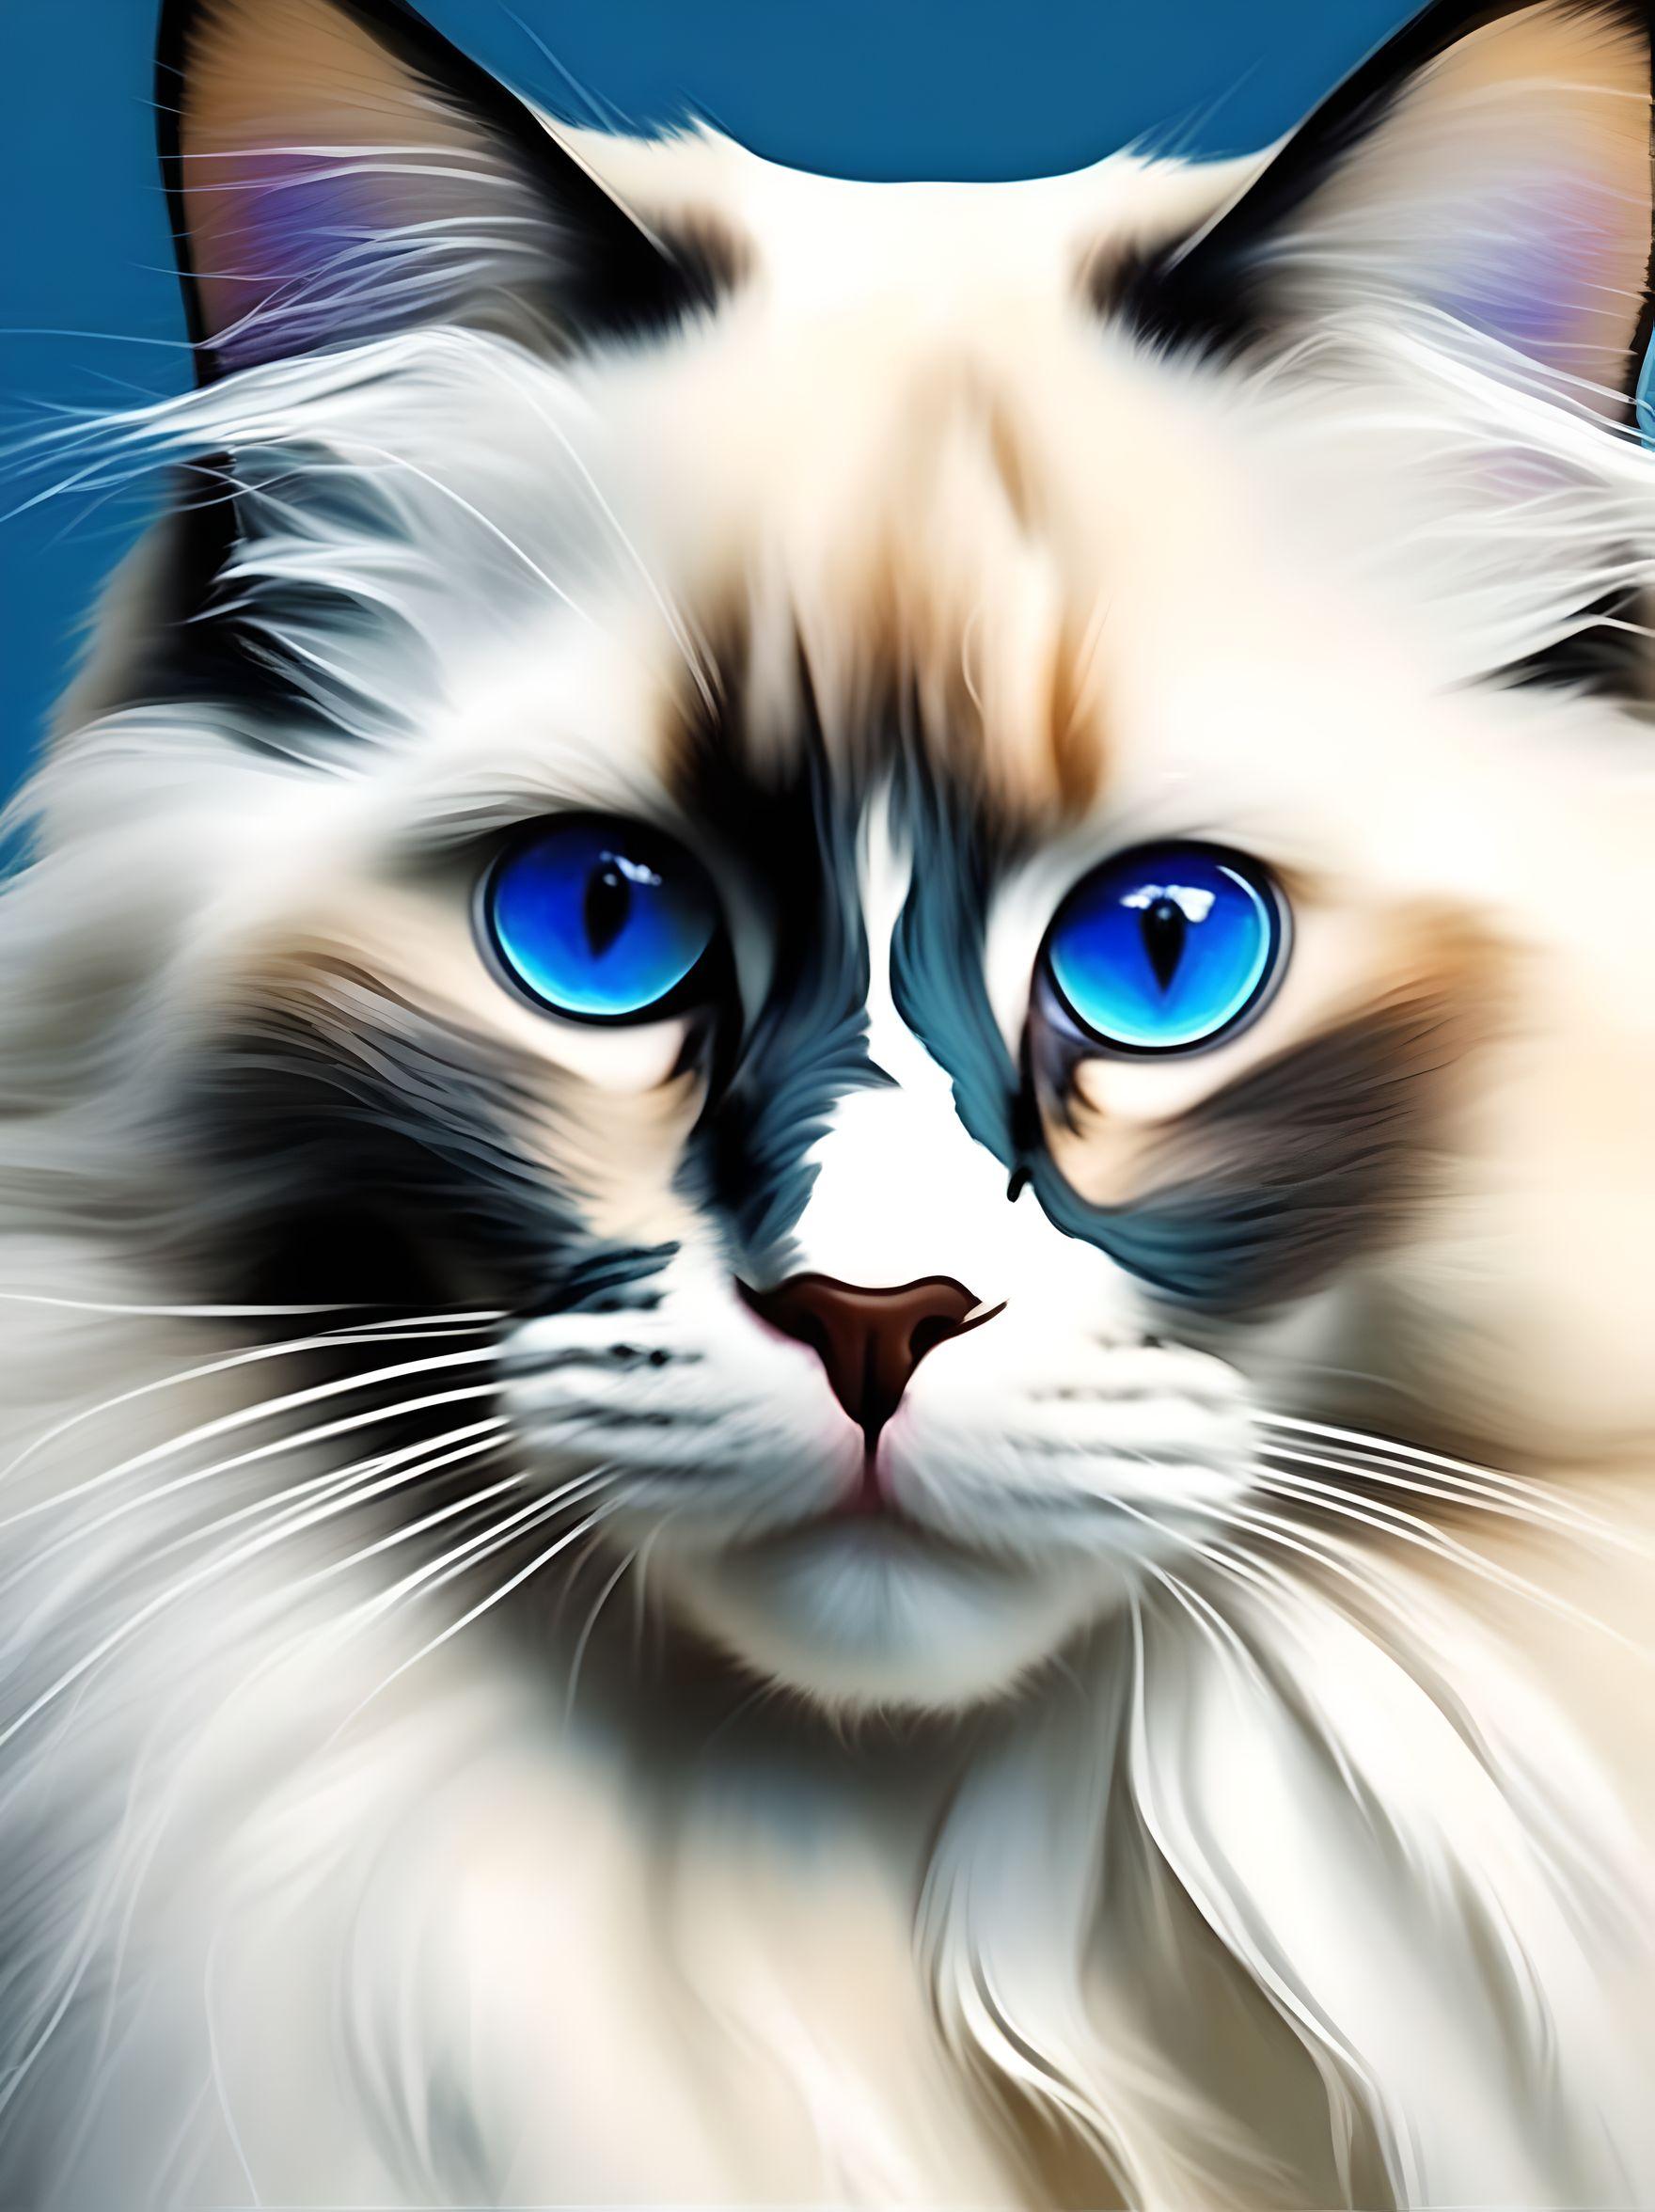 Ragdolls are large- muscular cats with striking blue eyes and a semi-longhaired coat that is soft and silky